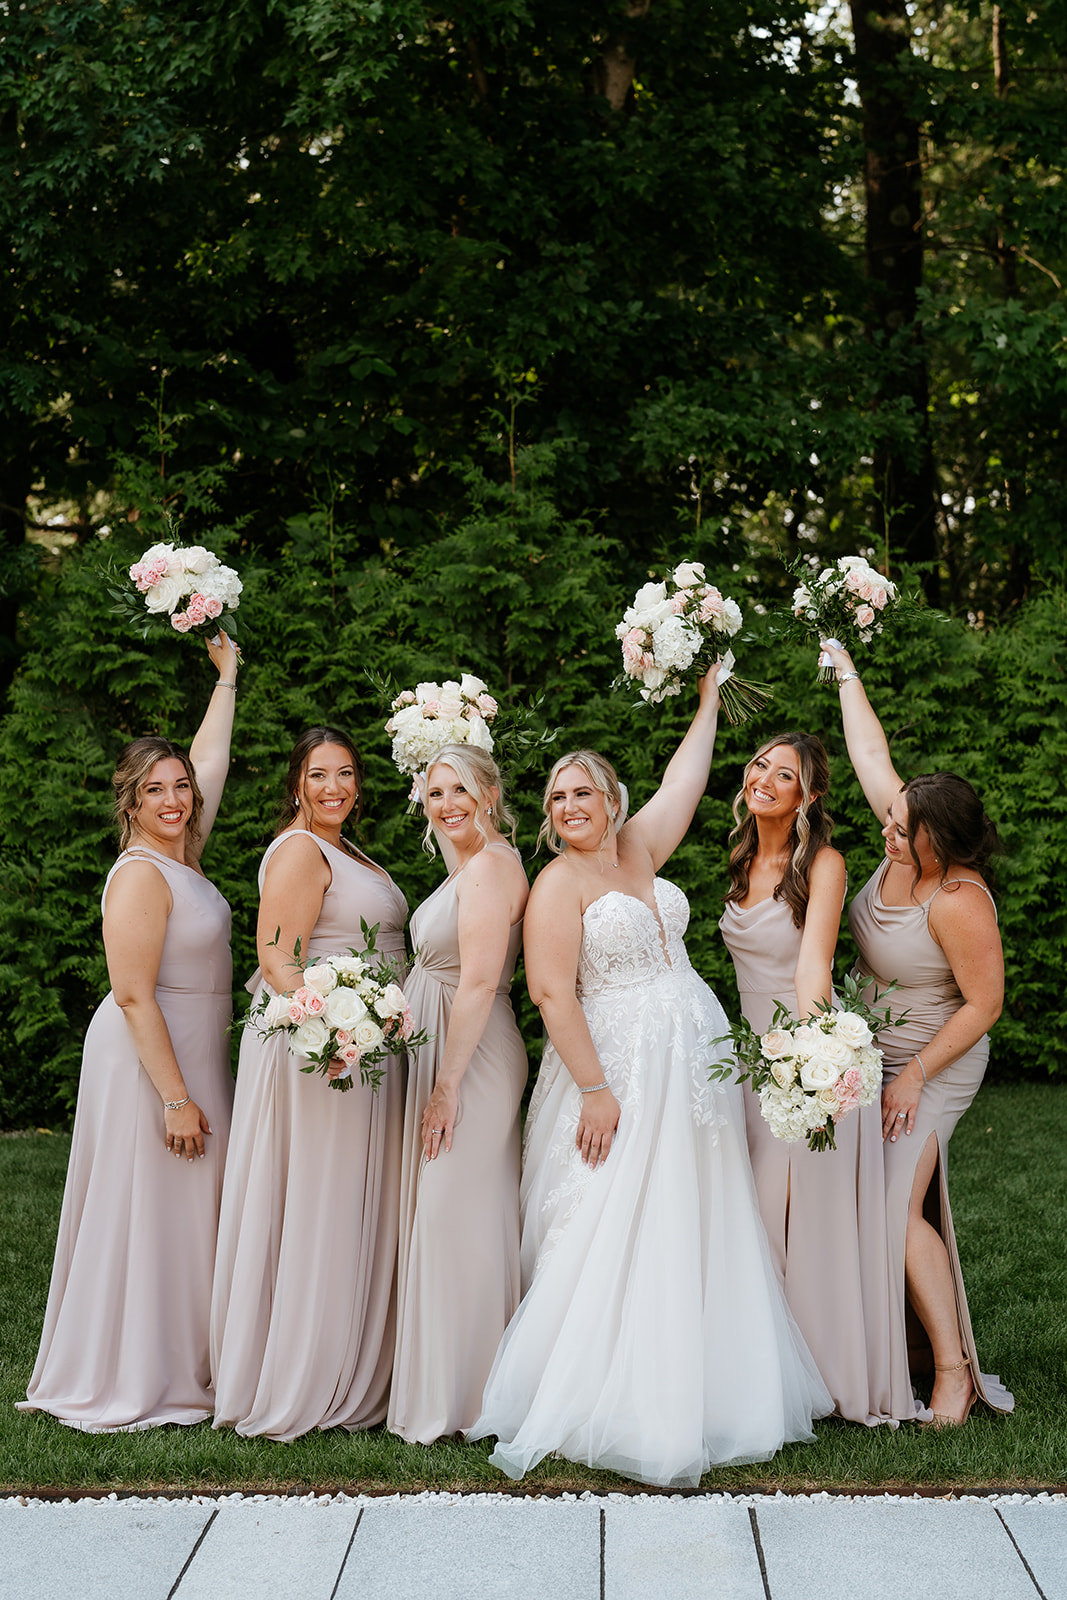 A bride in a white dress stands with four bridesmaids in matching pale pink dresses, all holding bouquets and raising one arm joyfully in front of a green hedge at Lakeview Pavilion